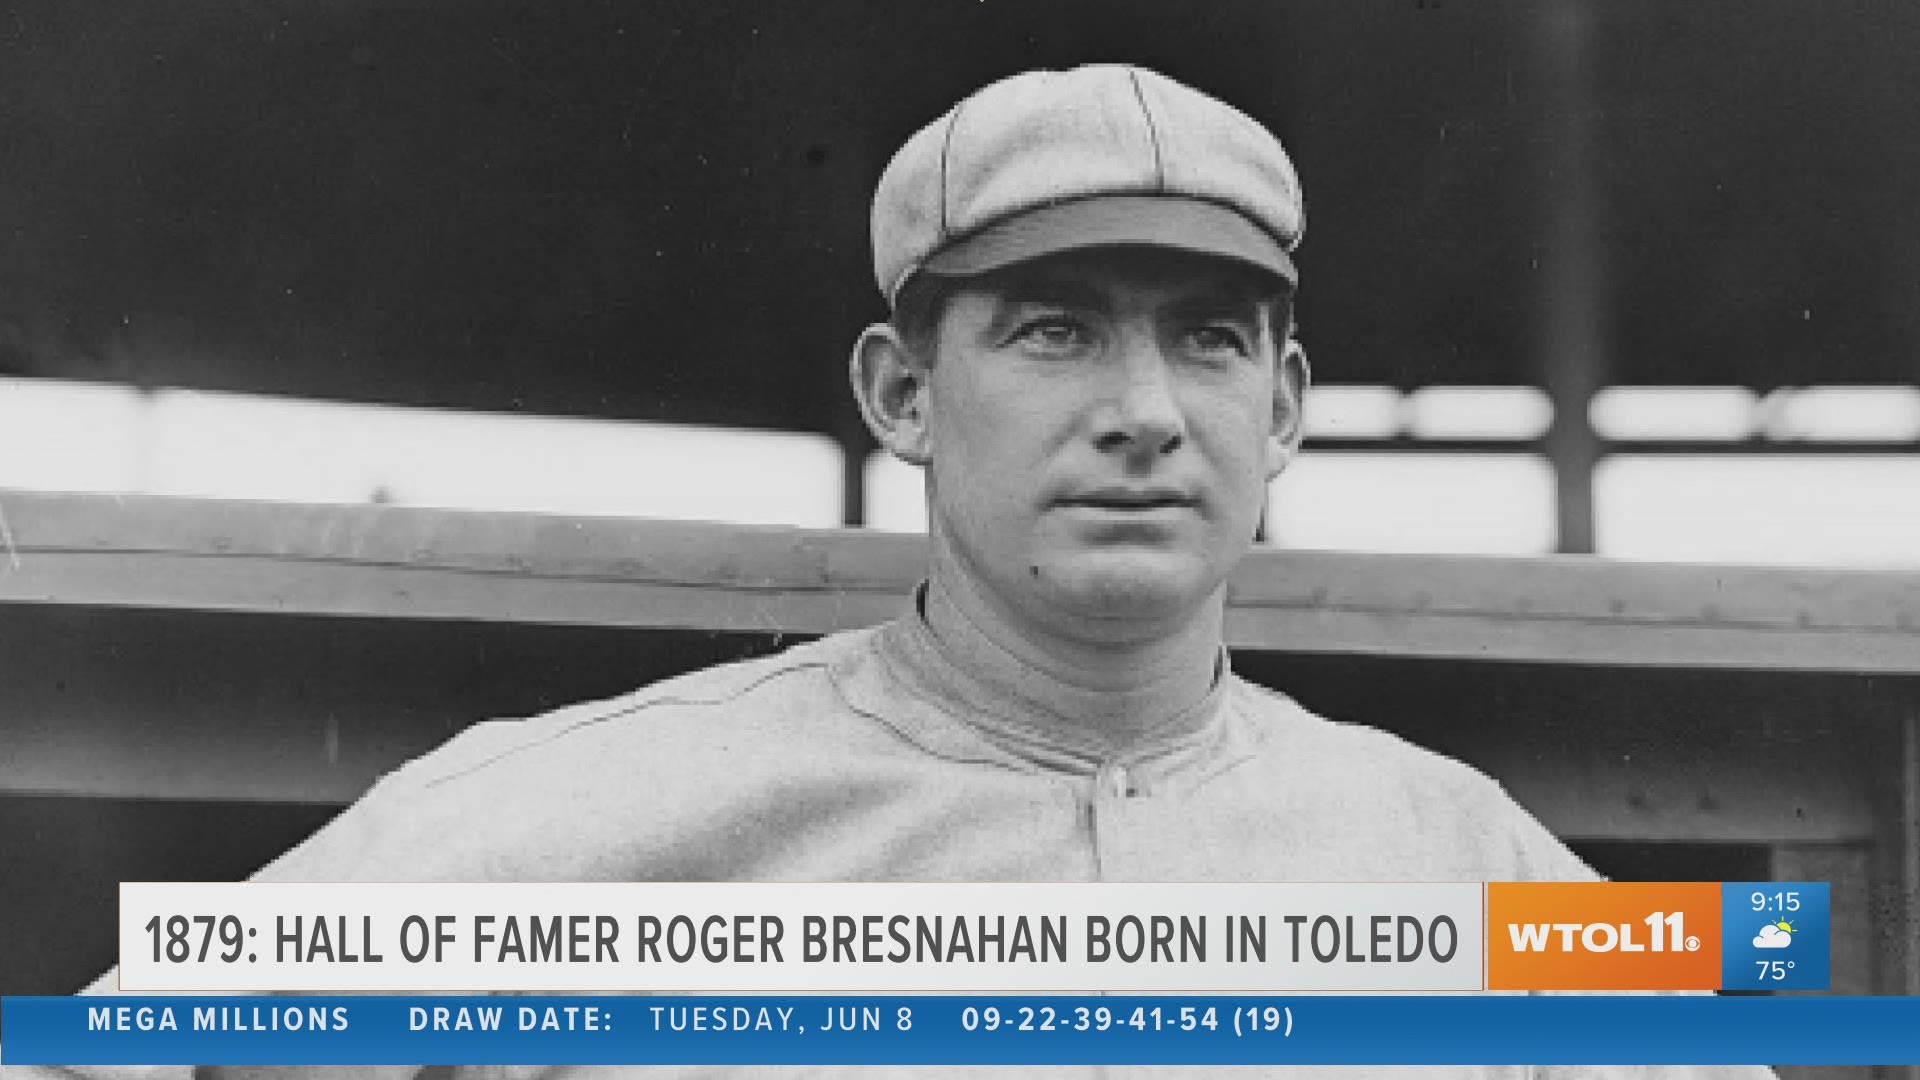 On June 11, 1879, baseball great and Hall of Fame player Roger Bresnahan is born right here in Toledo.